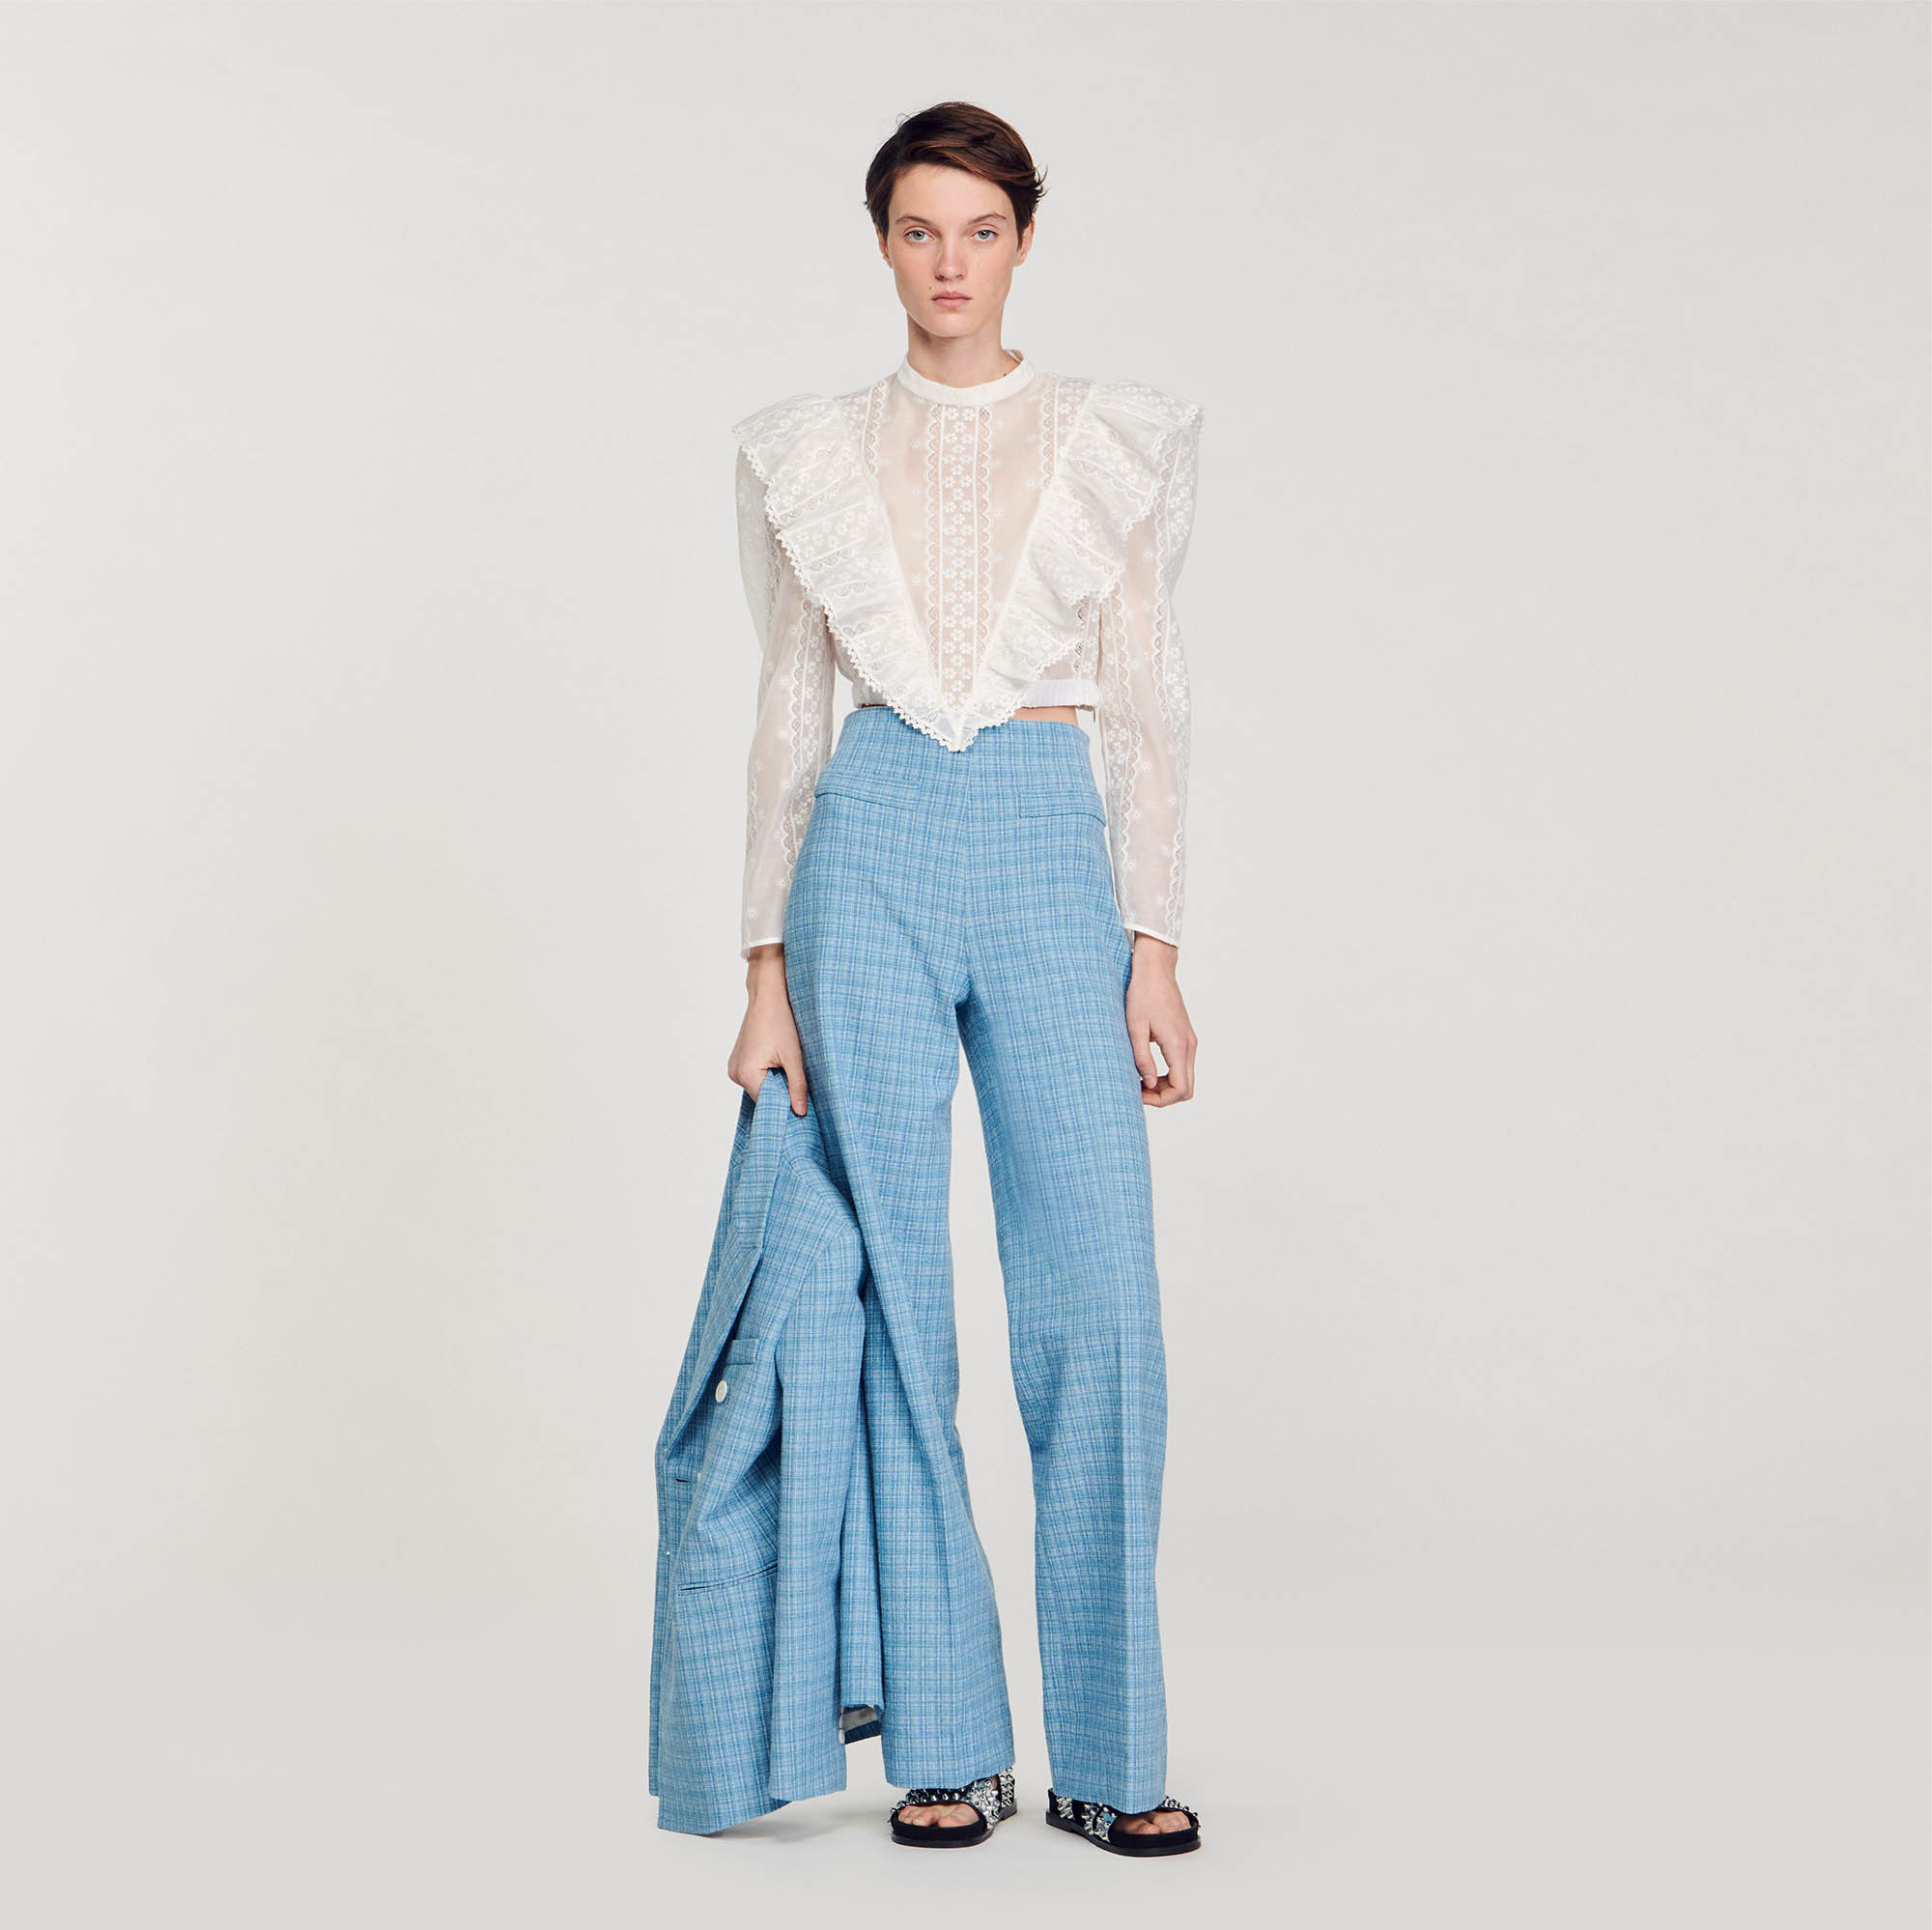 Sandro polyester Lining: Crop top in semi-sheer broderie anglaise with asymmetrical ruffles, featuring a round neck, long sleeves and a button fastening at the back